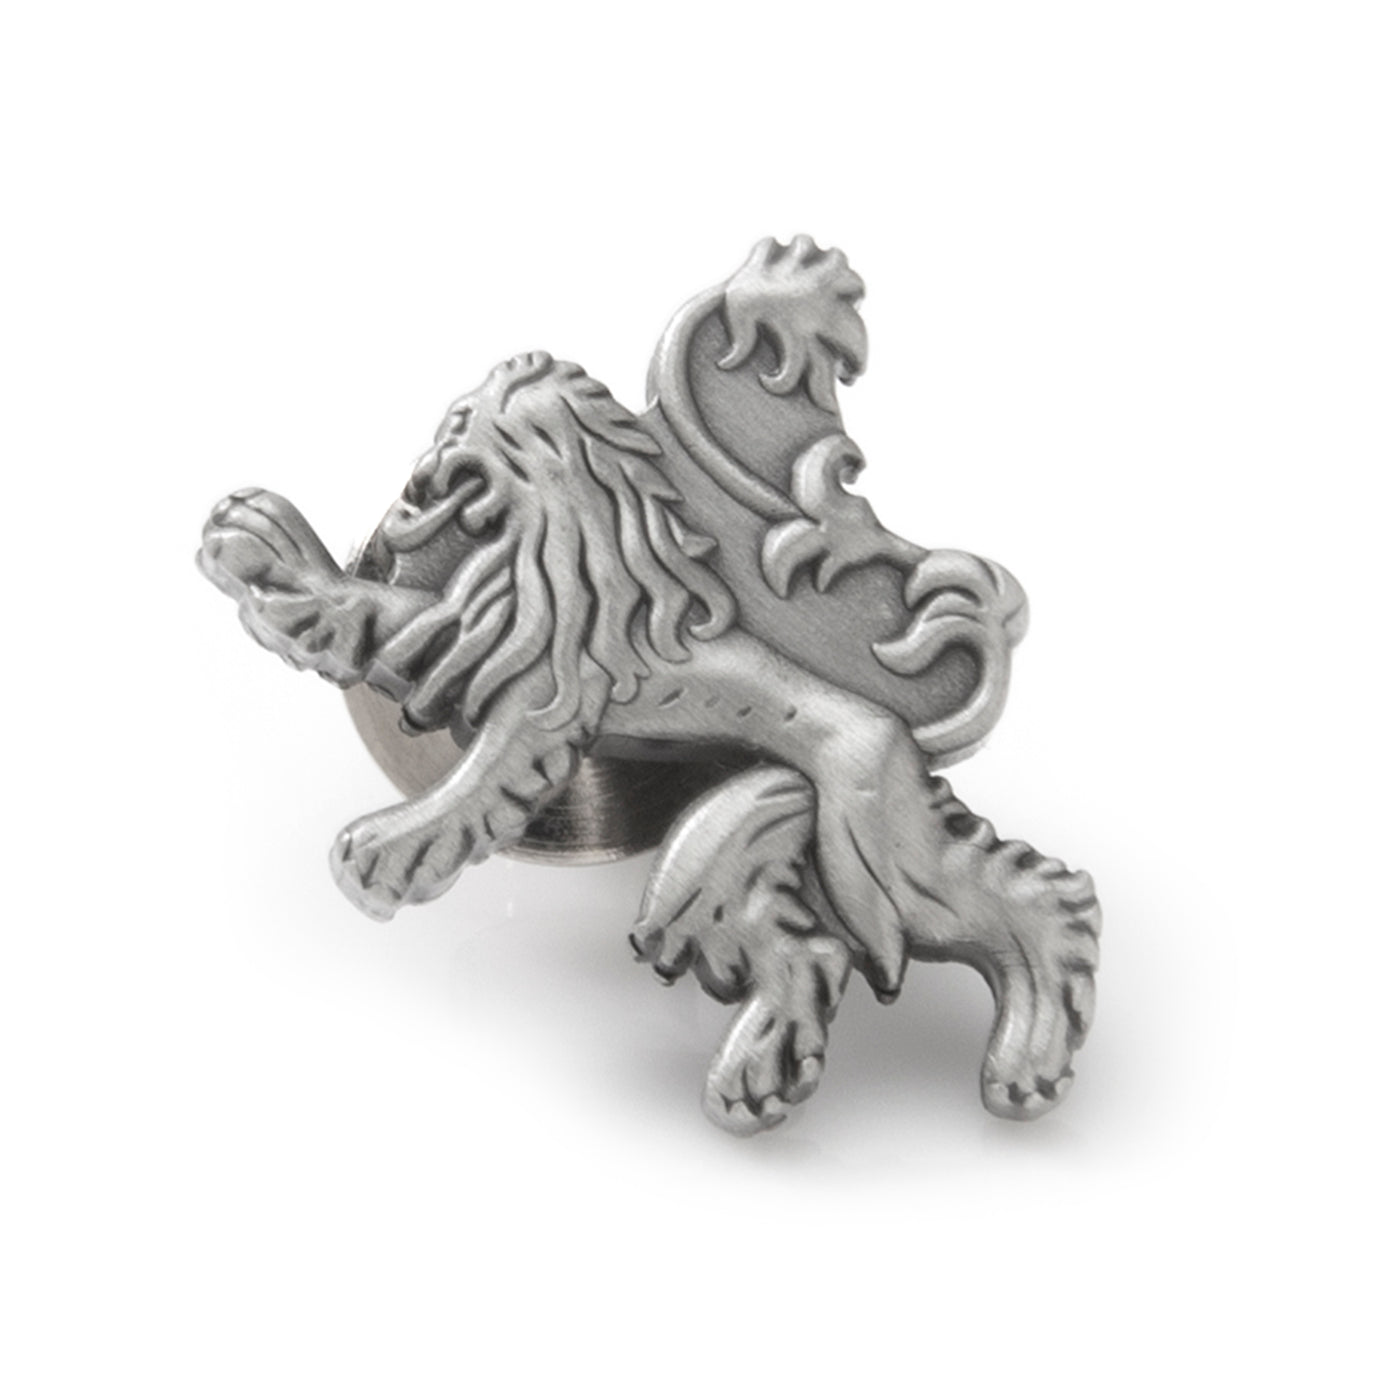 Game of Thrones Lannister Lion Antiqued Lapel Pin